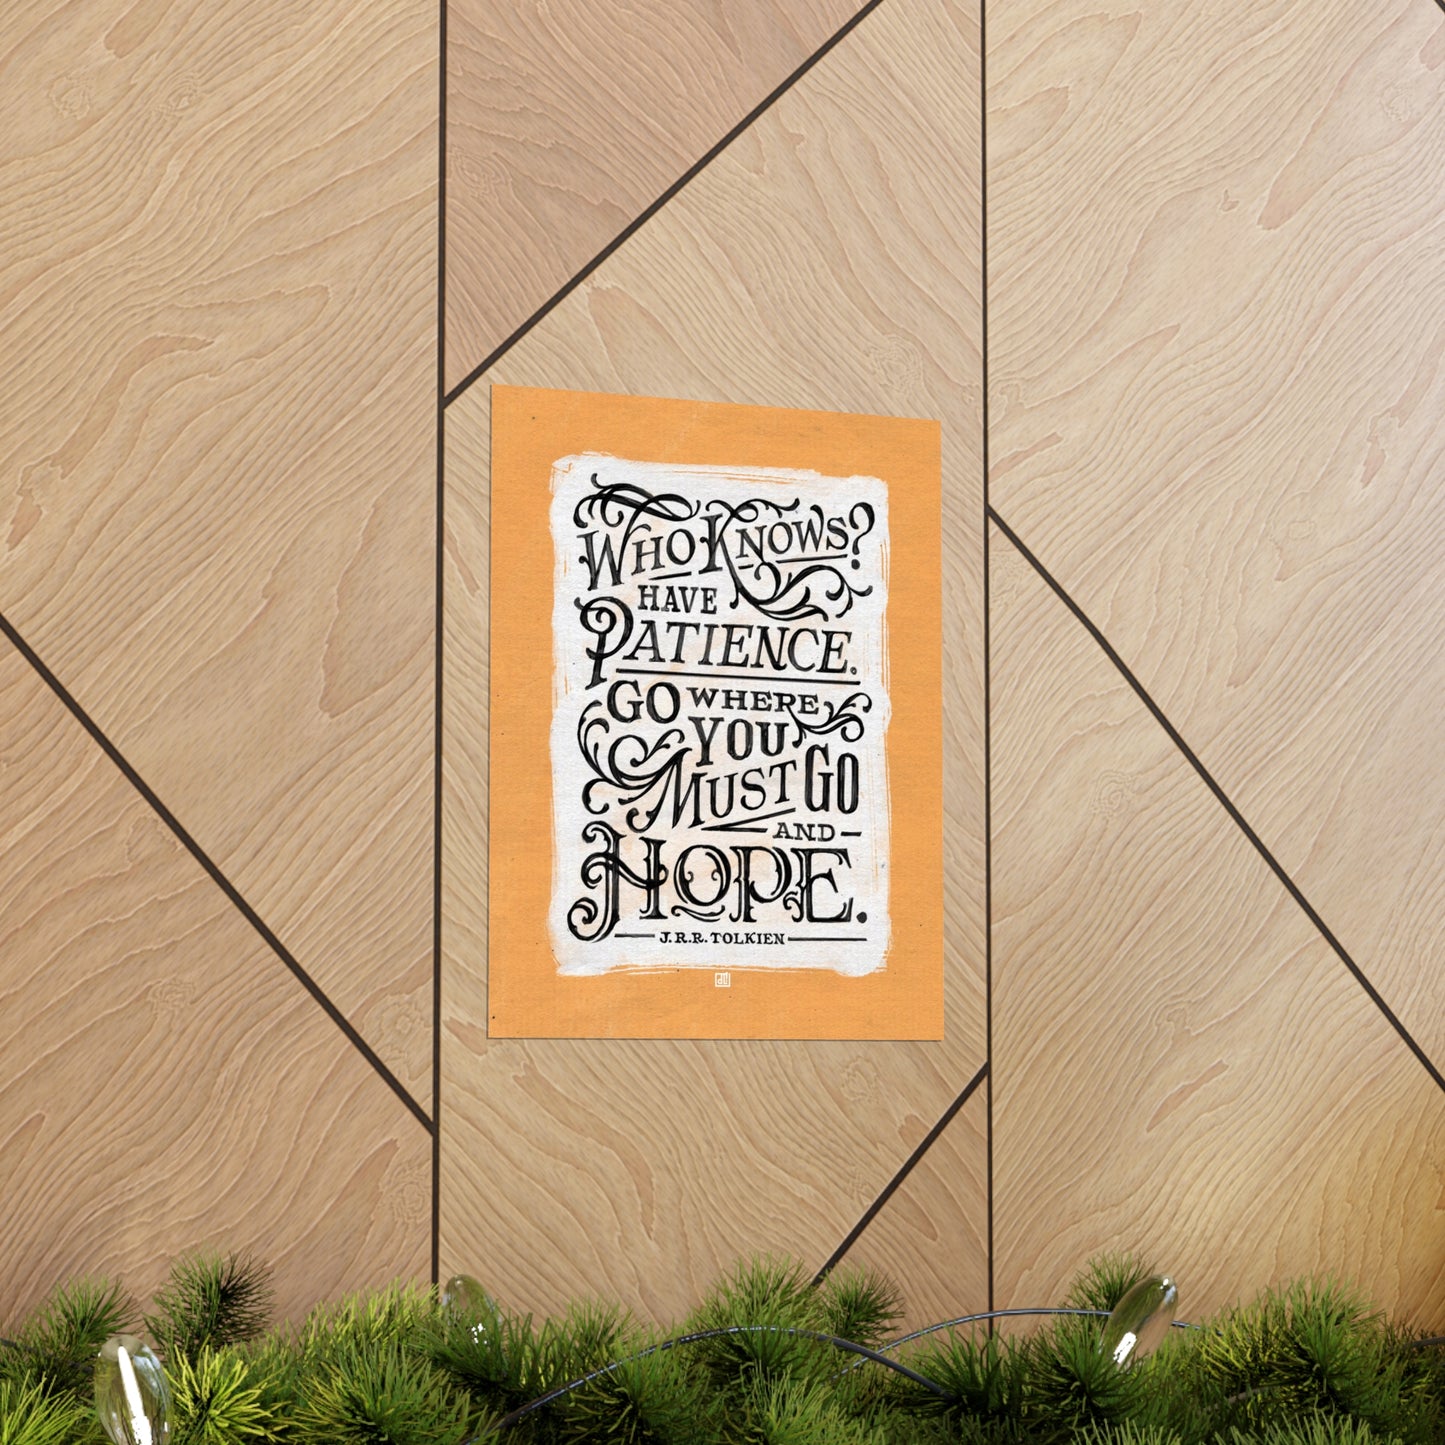 Go Where You Must Go And Hope — Tolkien Print